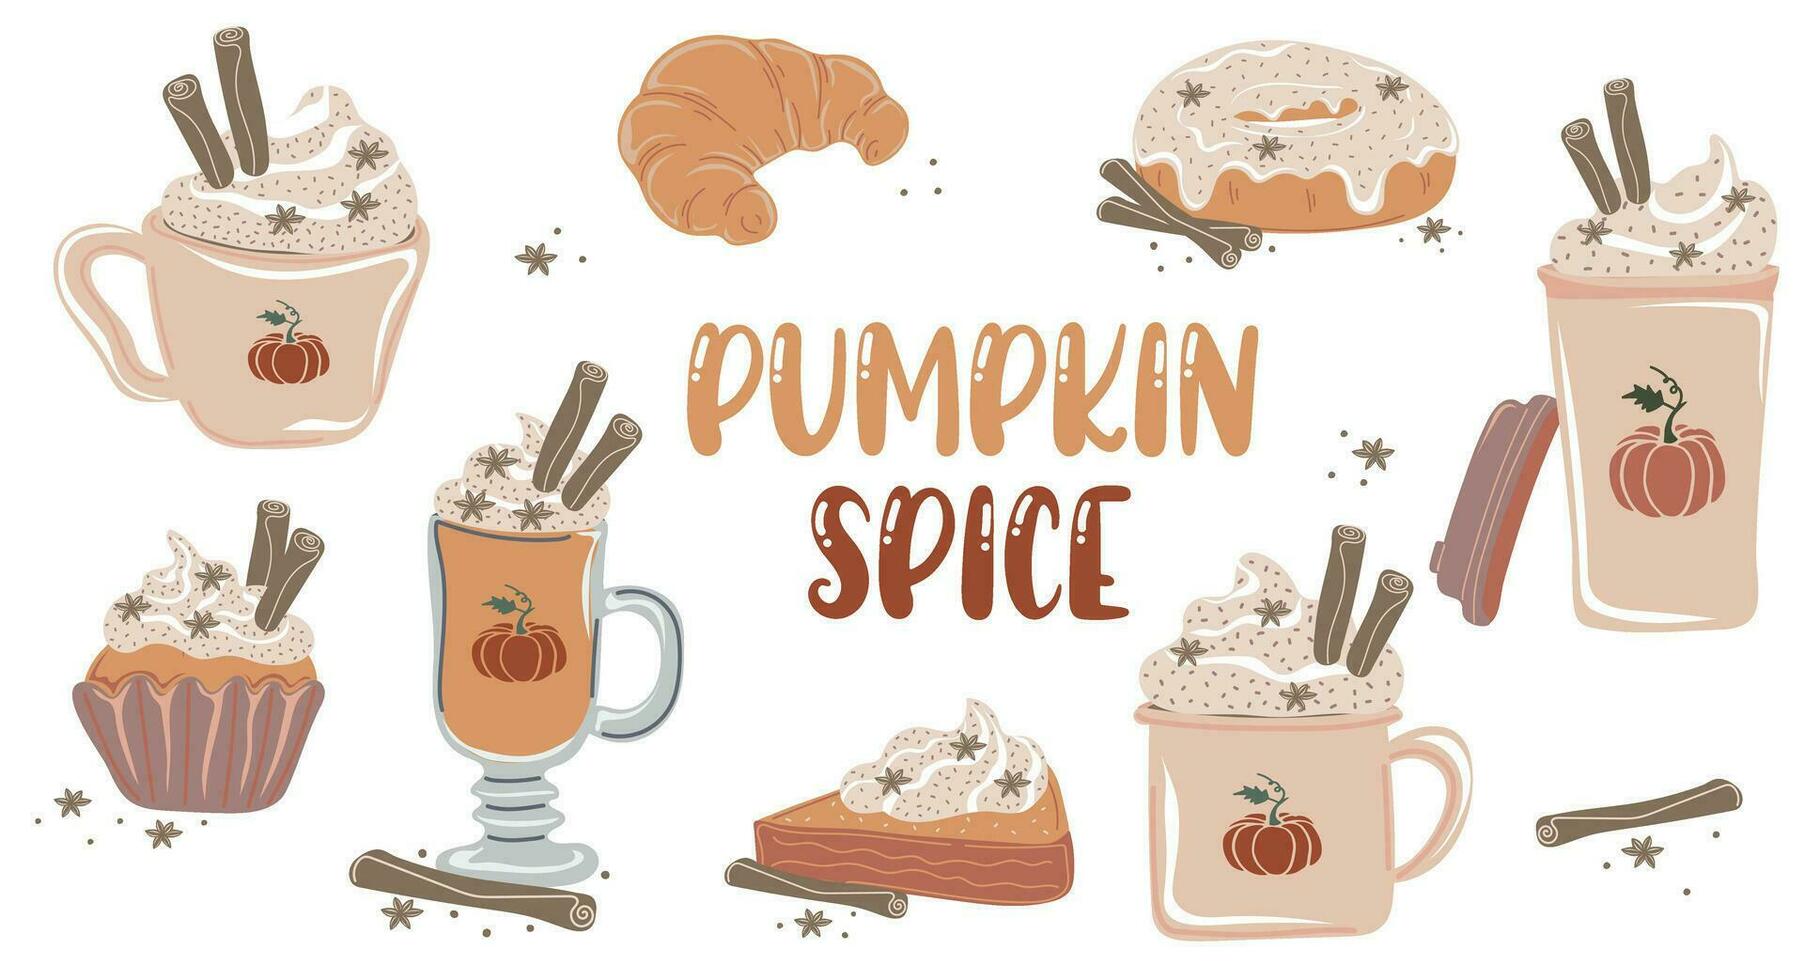 Pumpkin spice. Set of autumn pumpkins drinks and desserts. Muffin, donut, pie, croissant and latte with whipped cream and cinnamon for autumn design vector